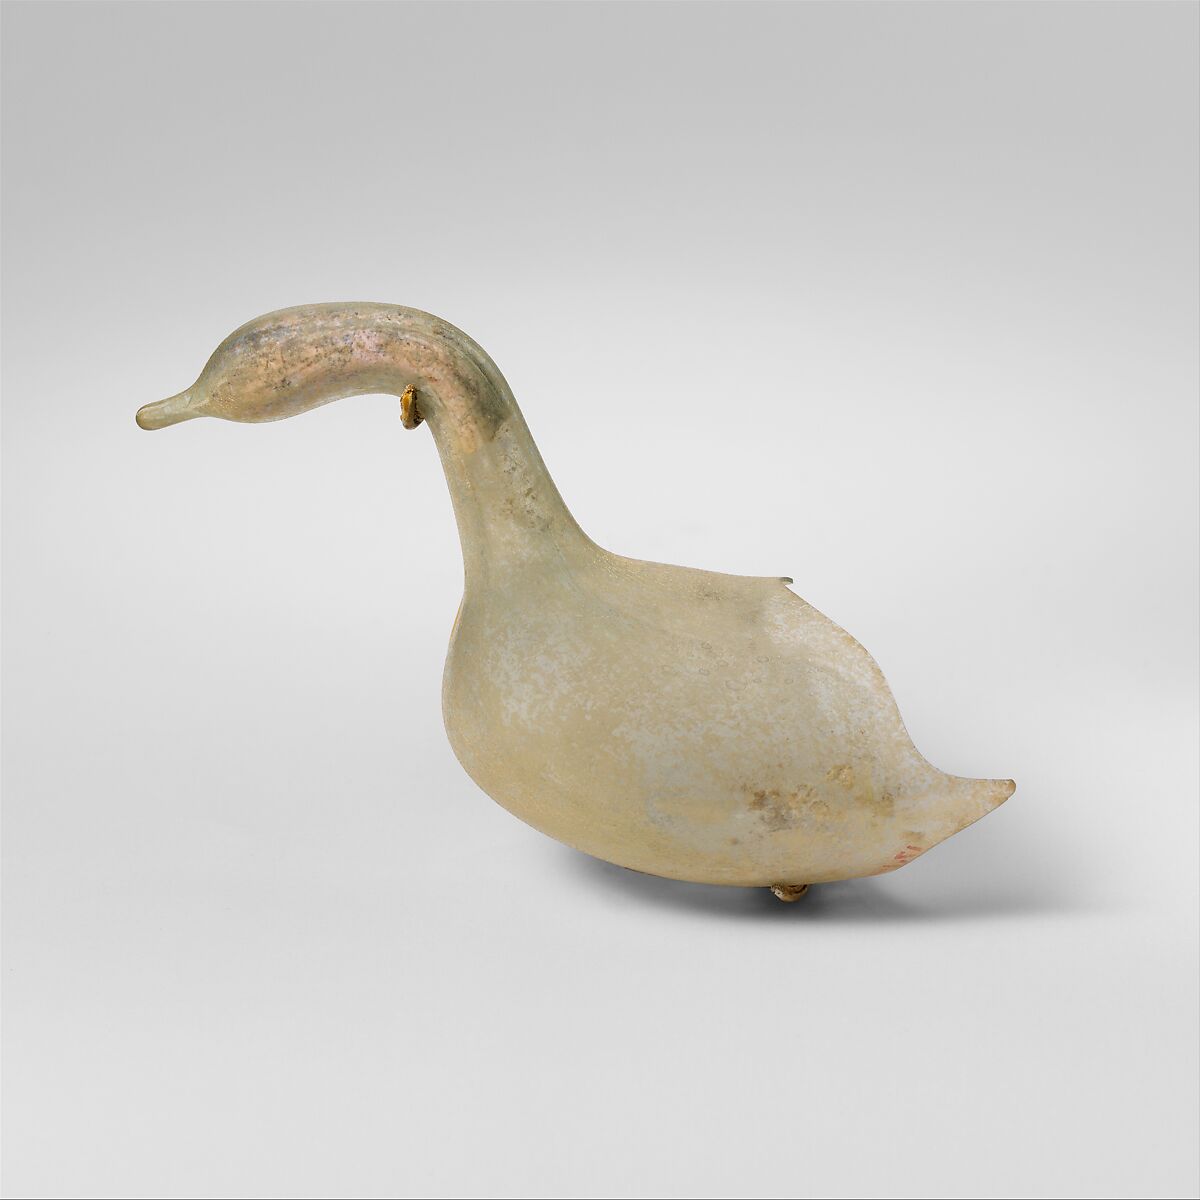 Roman bird-shaped glass vessels were used as perfume bottles. The liquid  was sealed inside the vessels and the tip of the tail had to be broken to  remove the perfume. The one